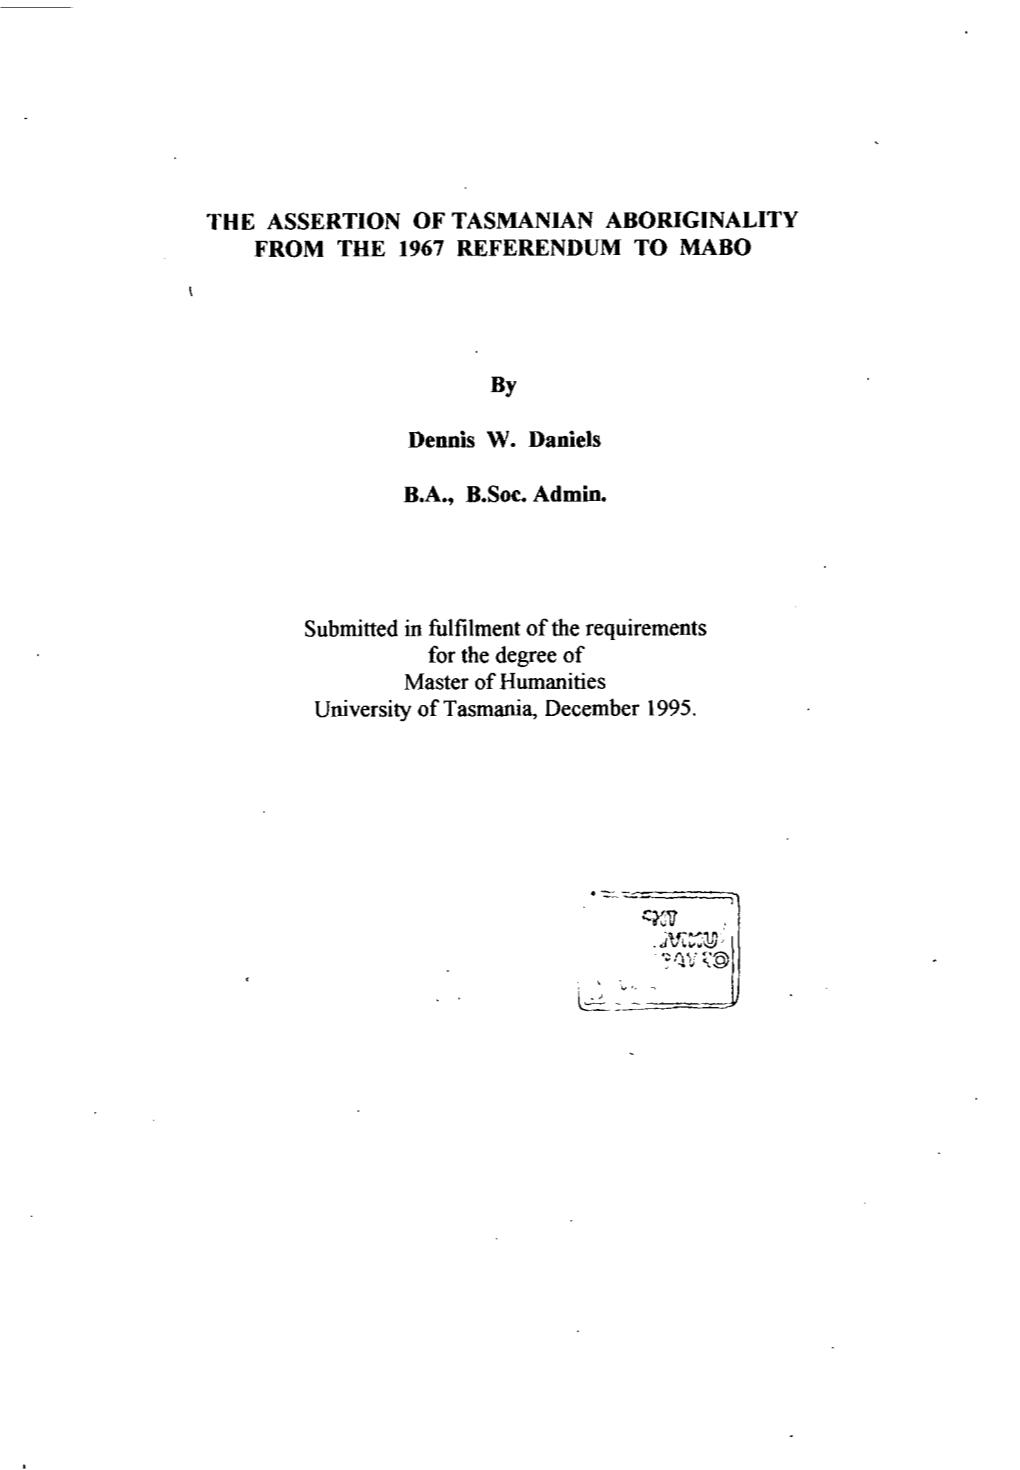 THE ASSERTION of TASMANIAN ABORIGINALITY from the 1967 REFERENDUM to MABO by Dennis W. Daniels B.A., B.Soe. Admin. Submitted In